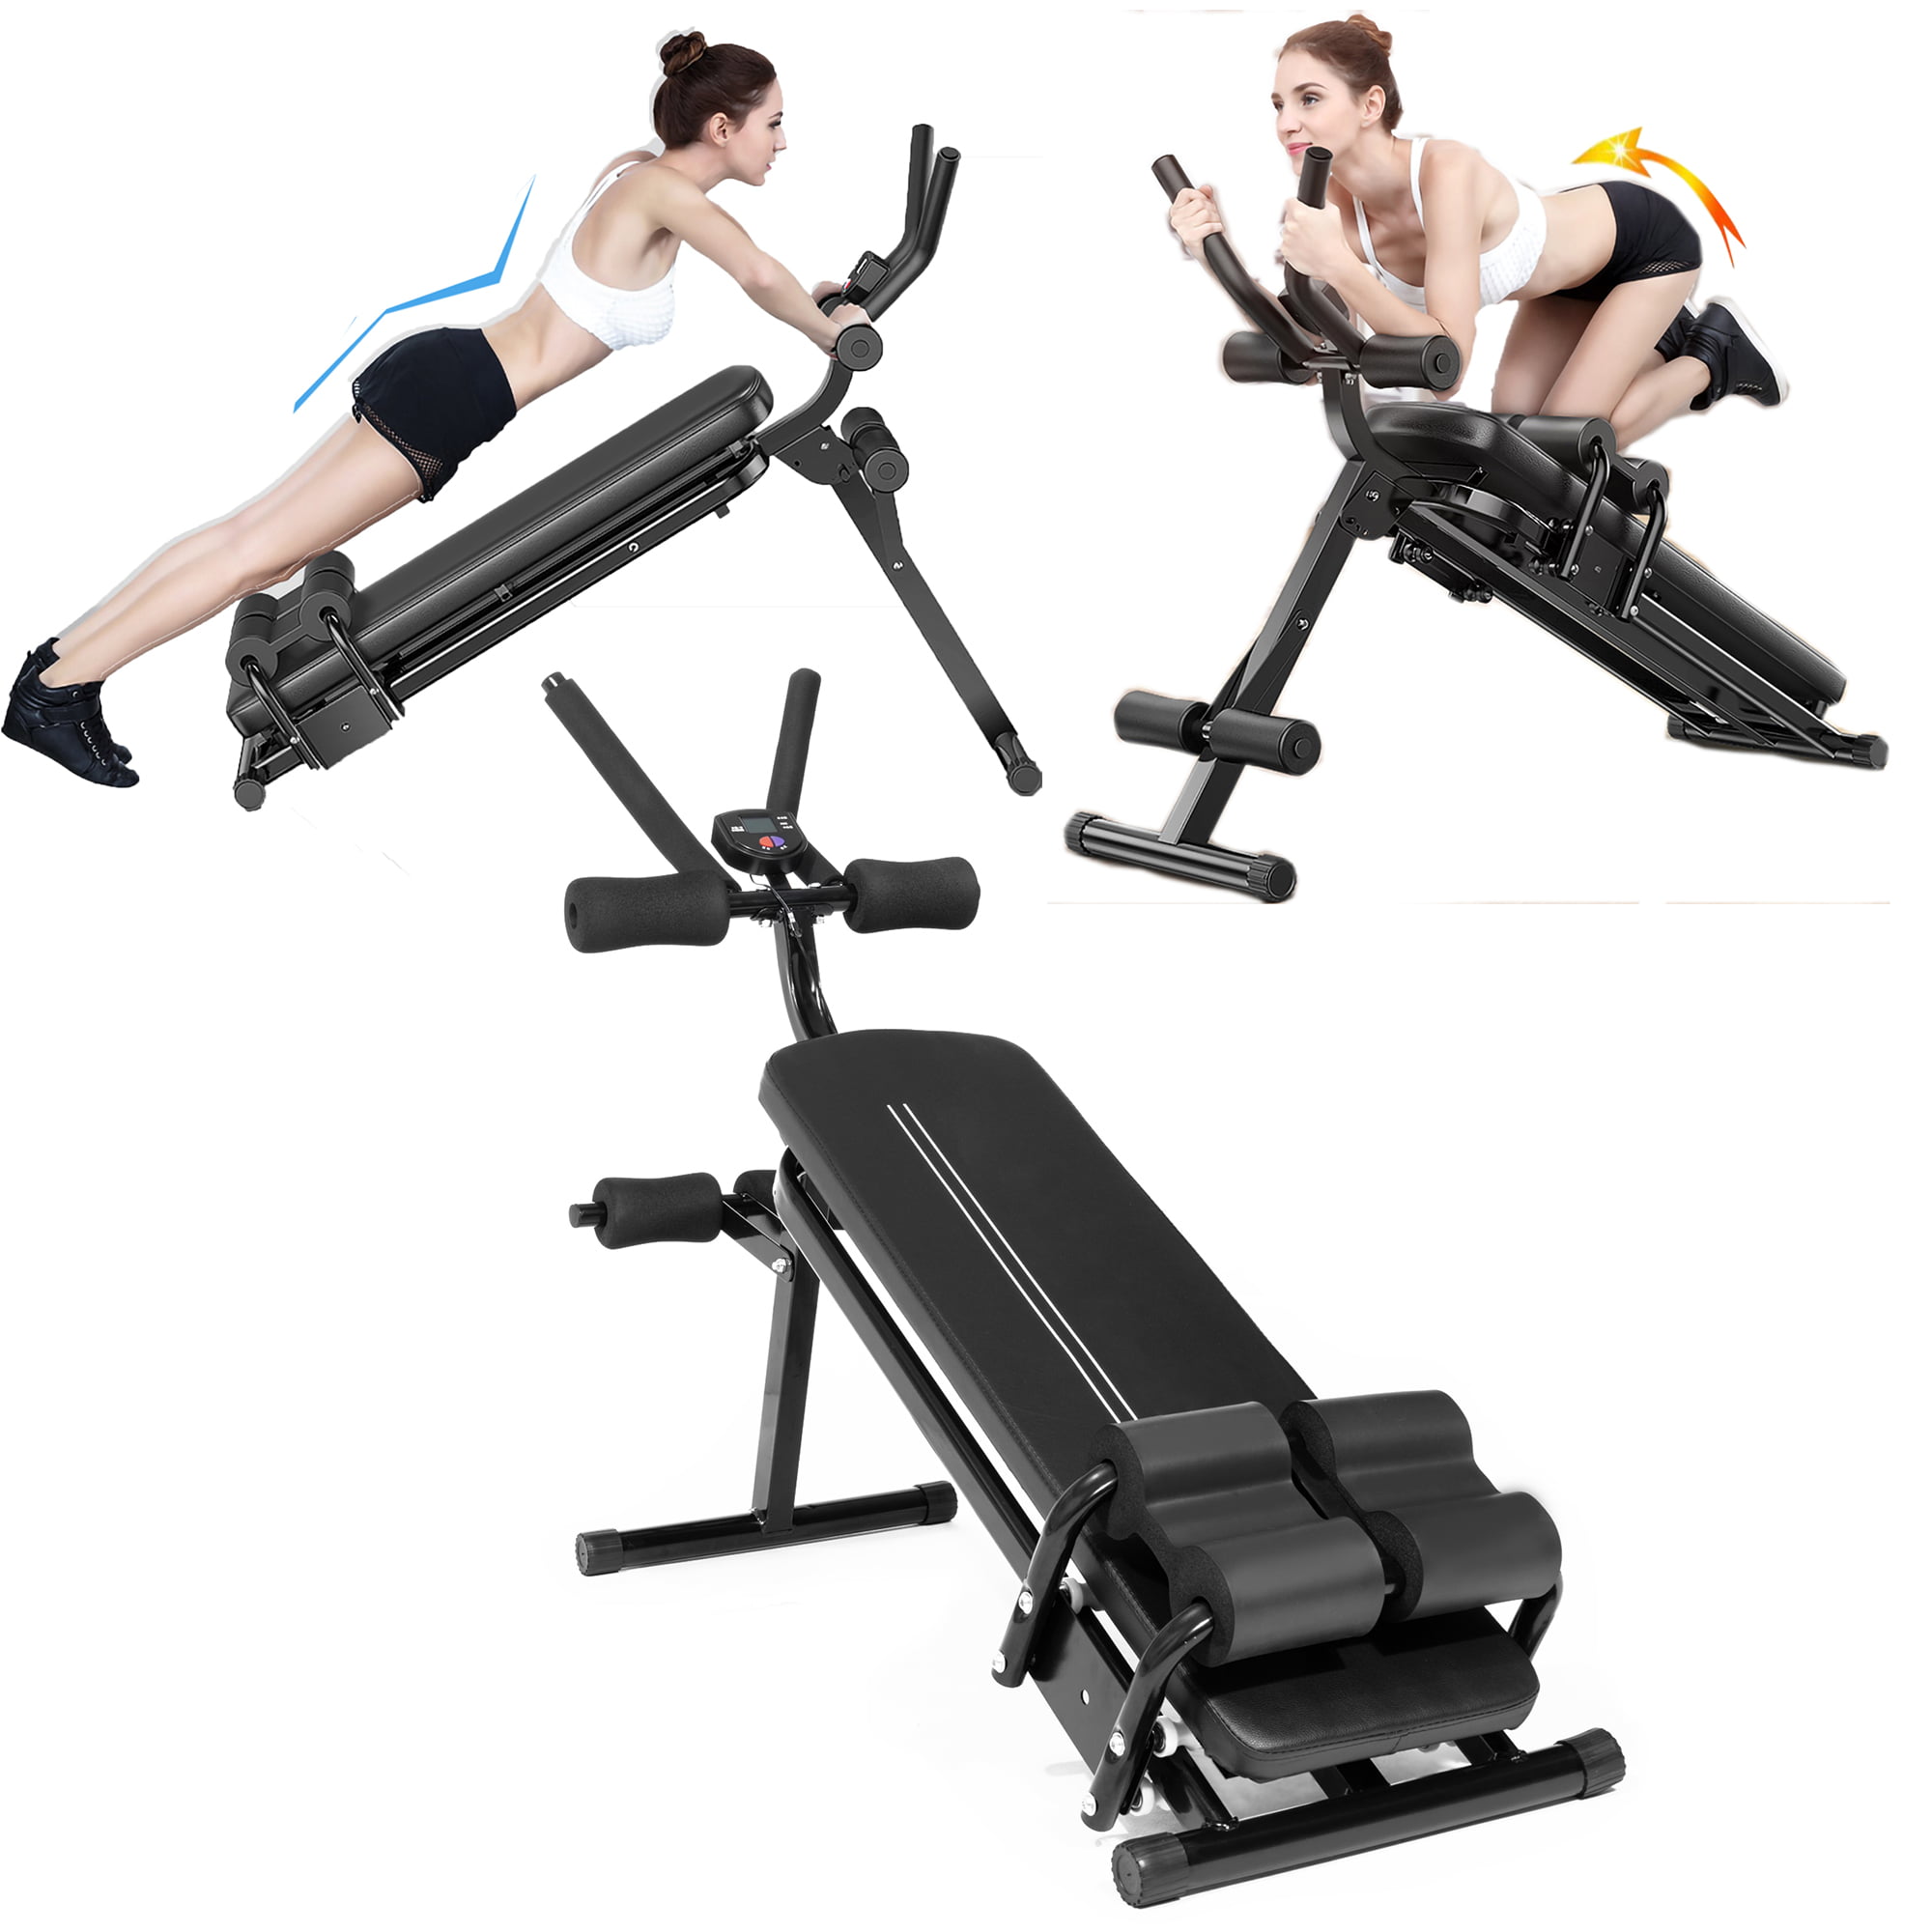 Foldable Strength Training Bench Press with LCD Monitor for Home Gym & body workout Sporfit Sit Up Bench Adjustable Ab Bench for Full Body Exercise 